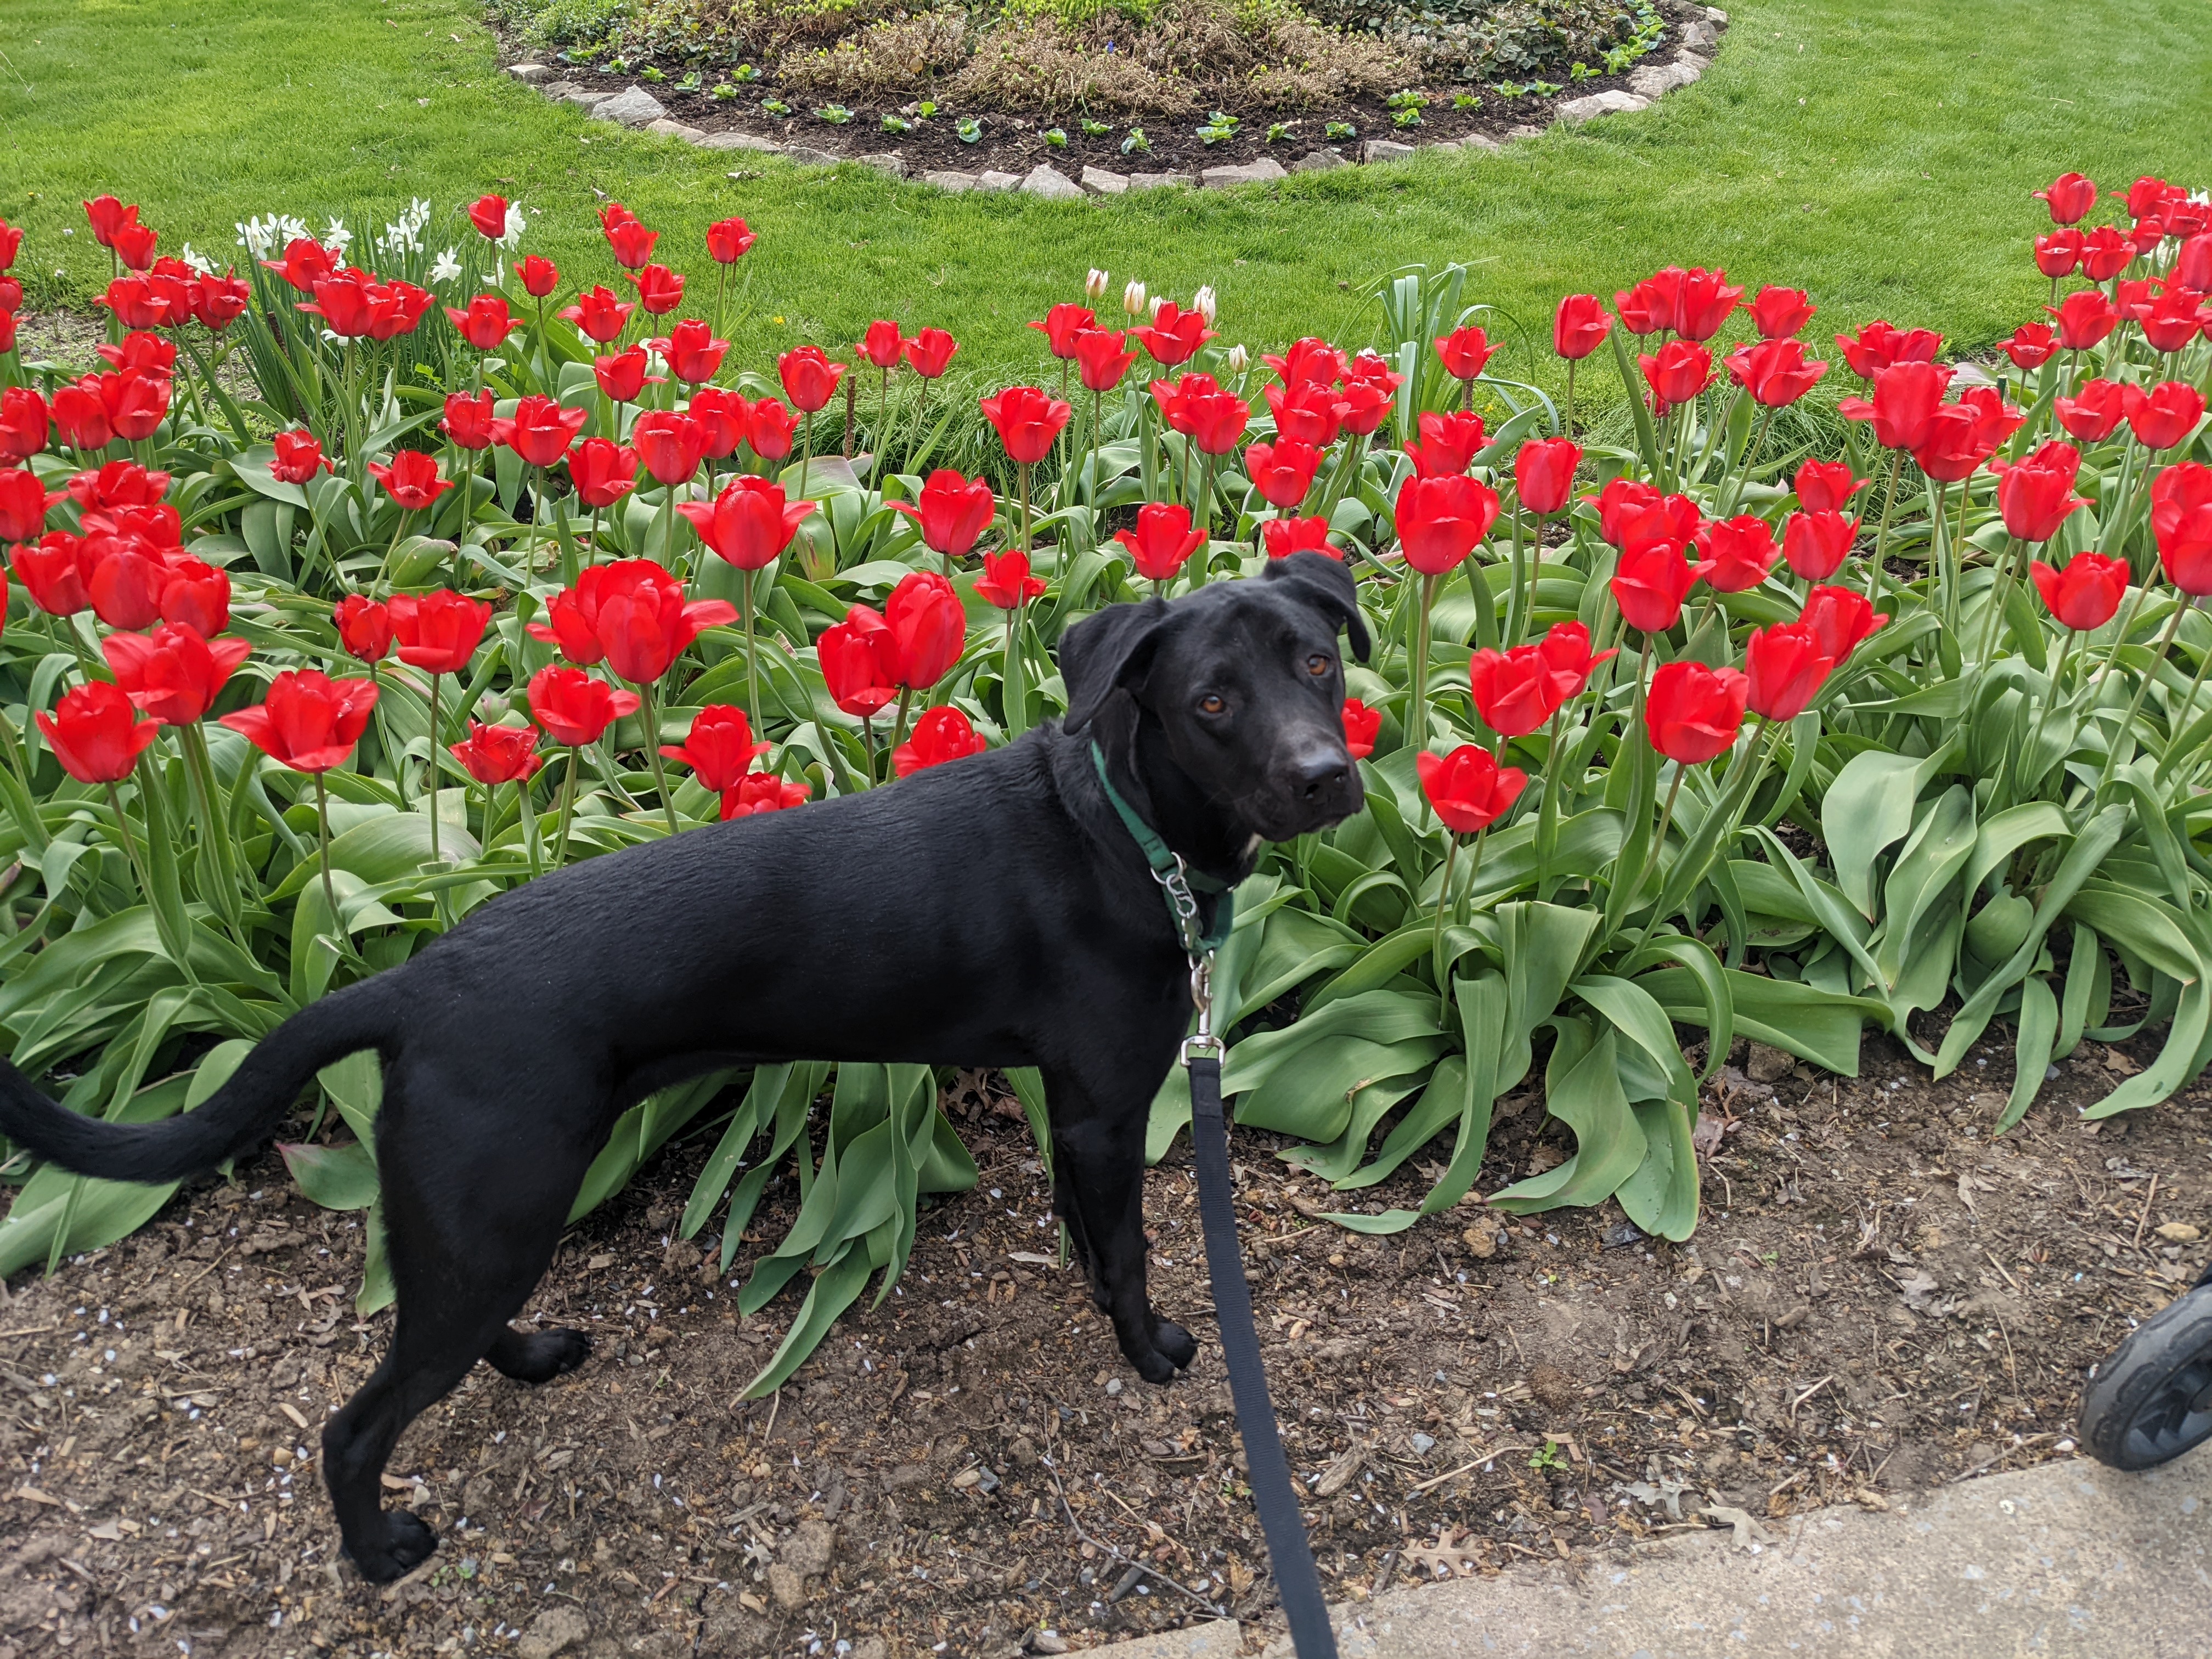 Curie is taking some time to stop and smell the tulips.